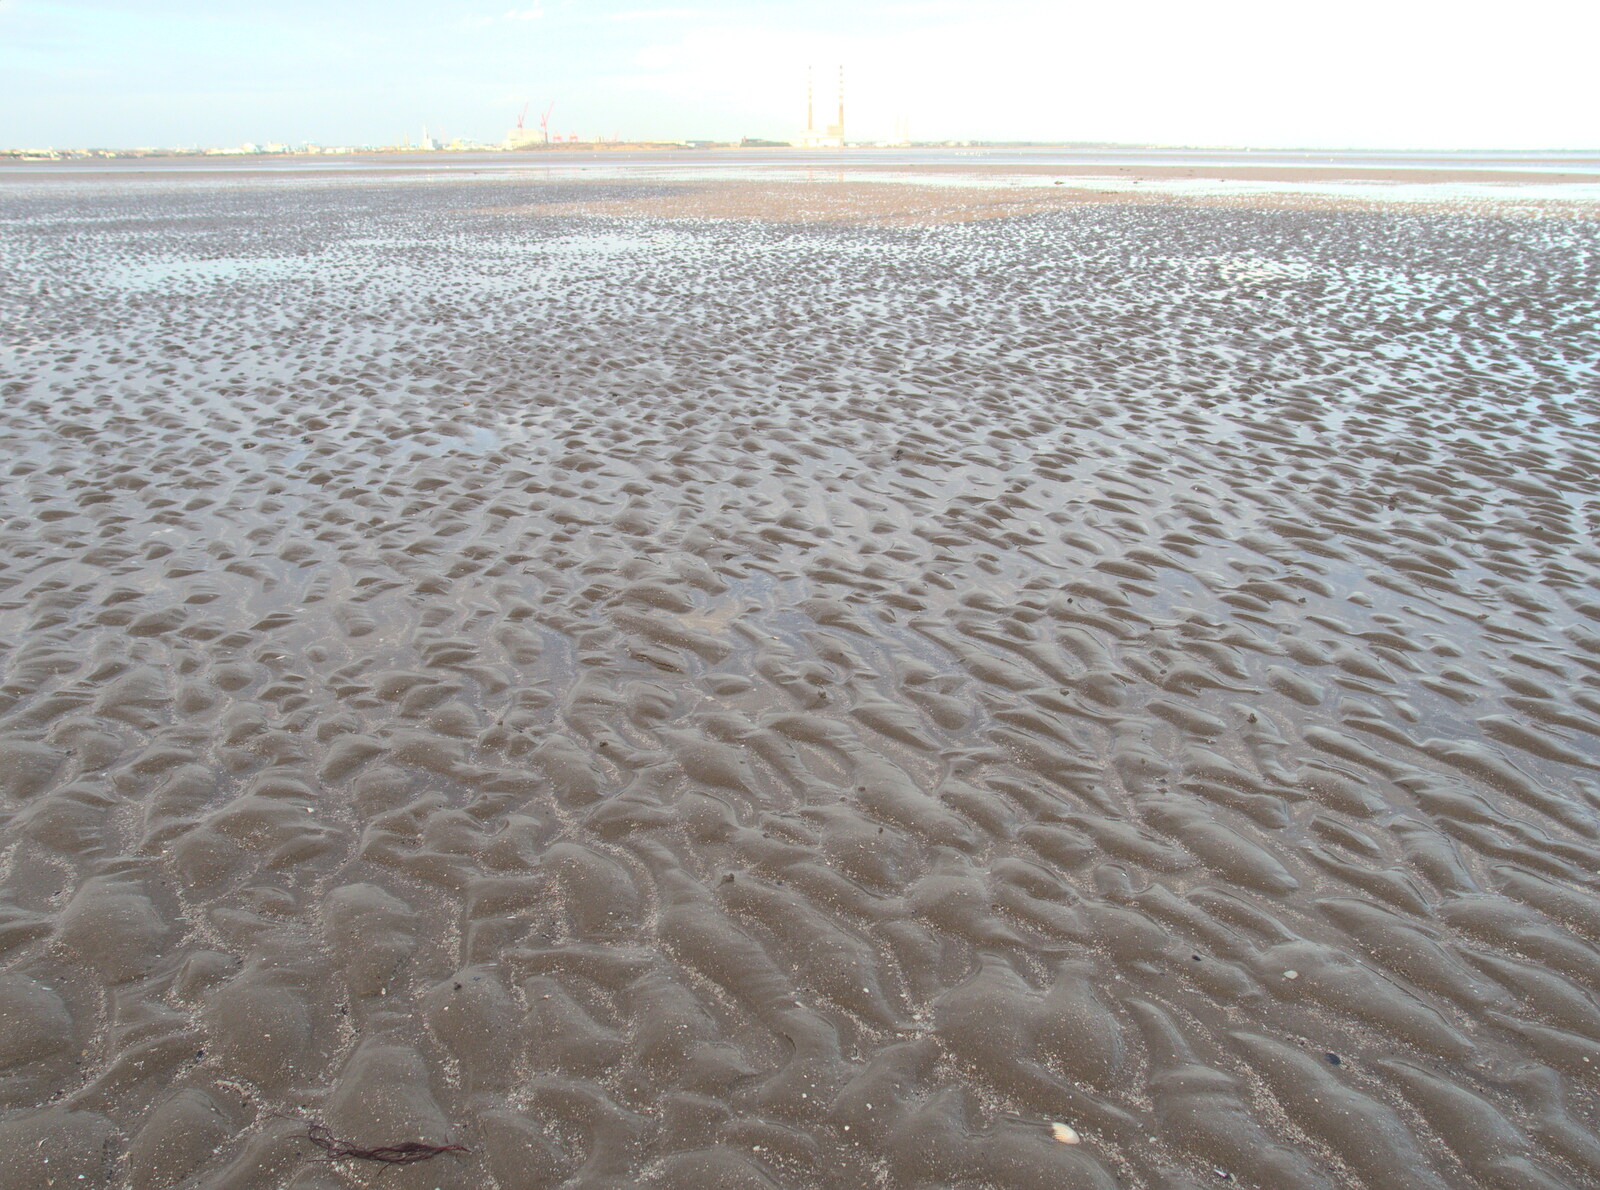 The ripply mudflats of Dublin Bay from Christmas Eve in Dublin and Blackrock, Ireland - 24th December 2015